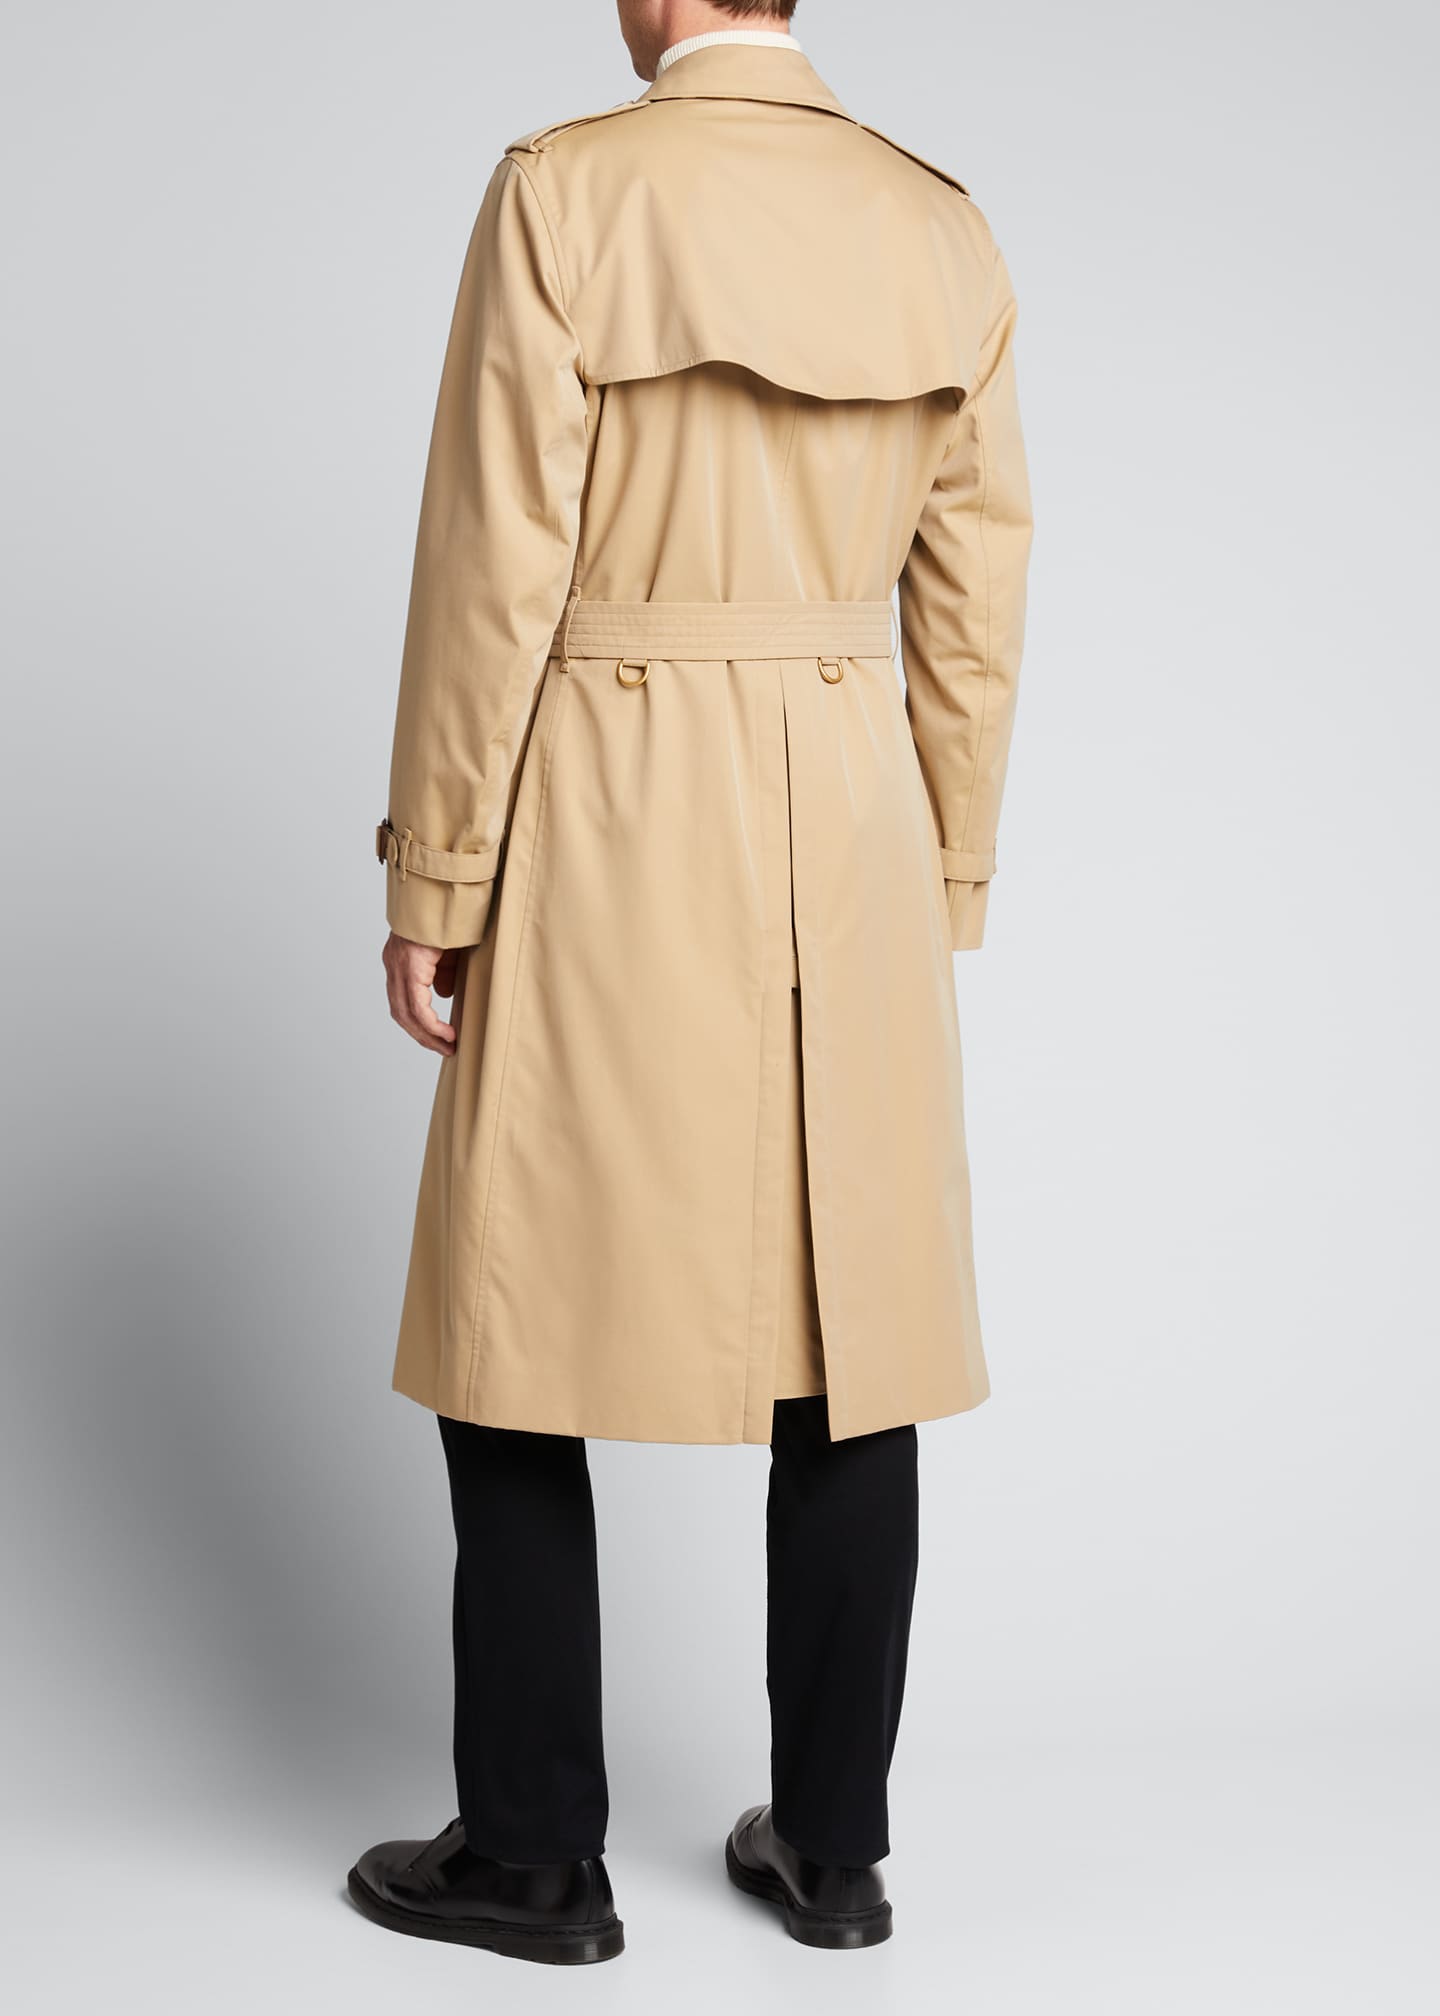 Burberry Men's Kensington Double-Breasted Long Trench Coat - Bergdorf ...